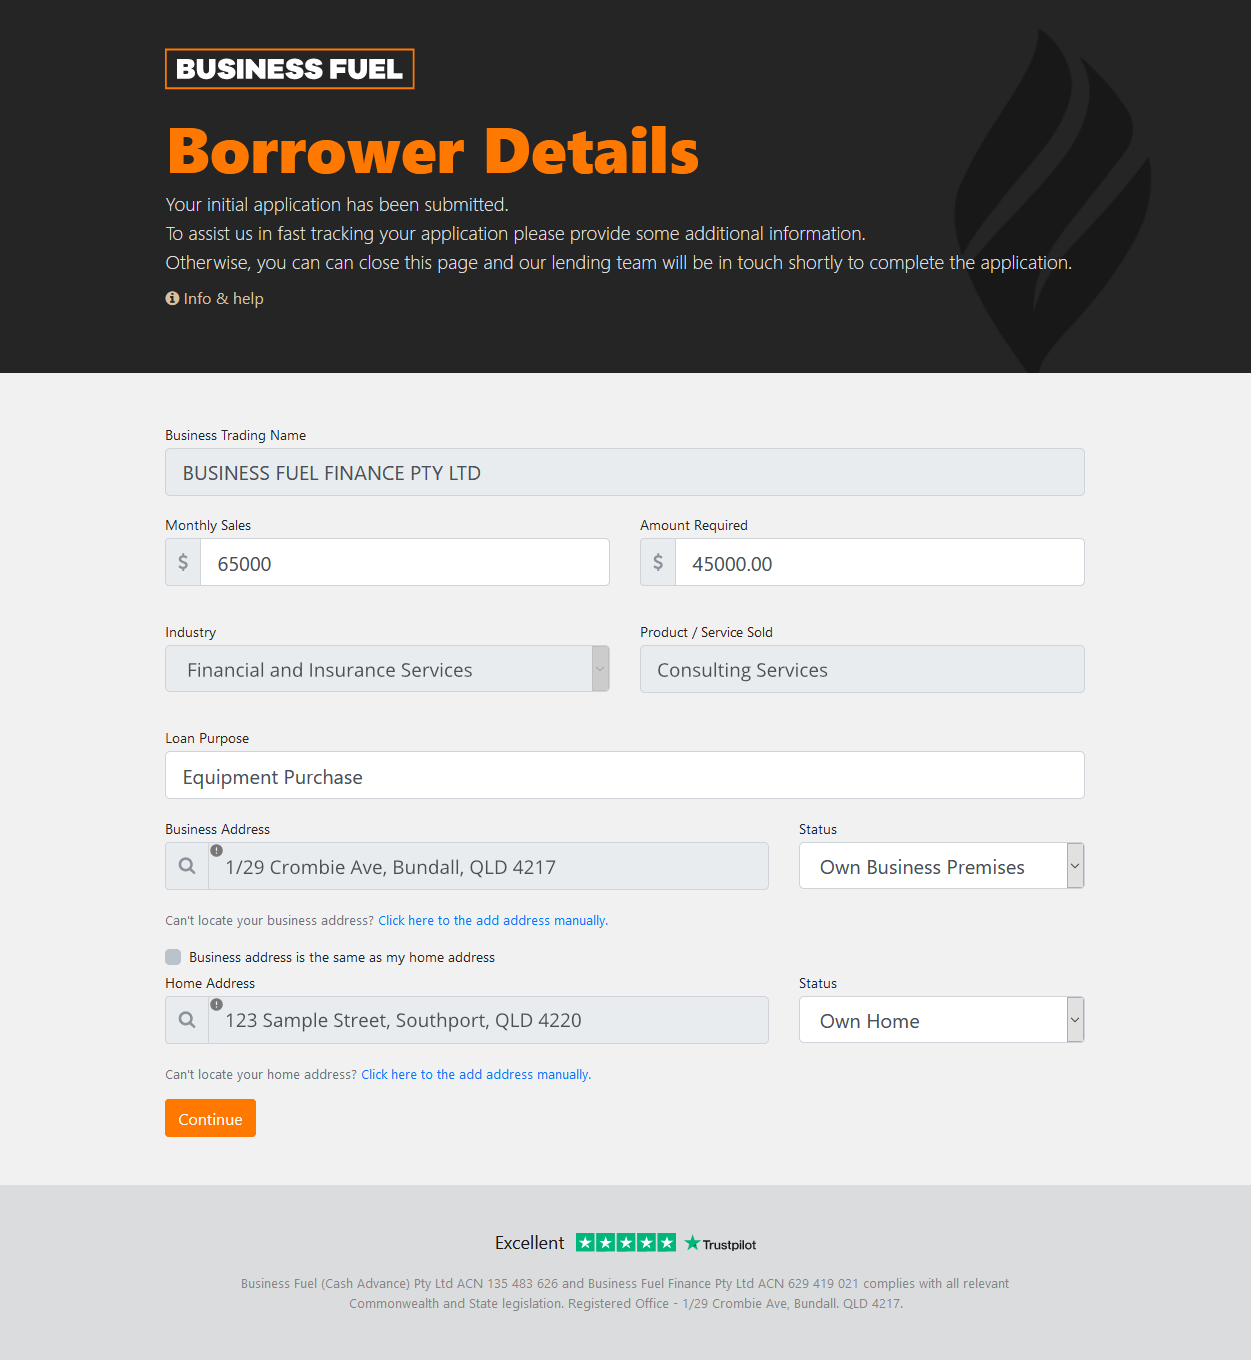 Borrower details page in a loan application